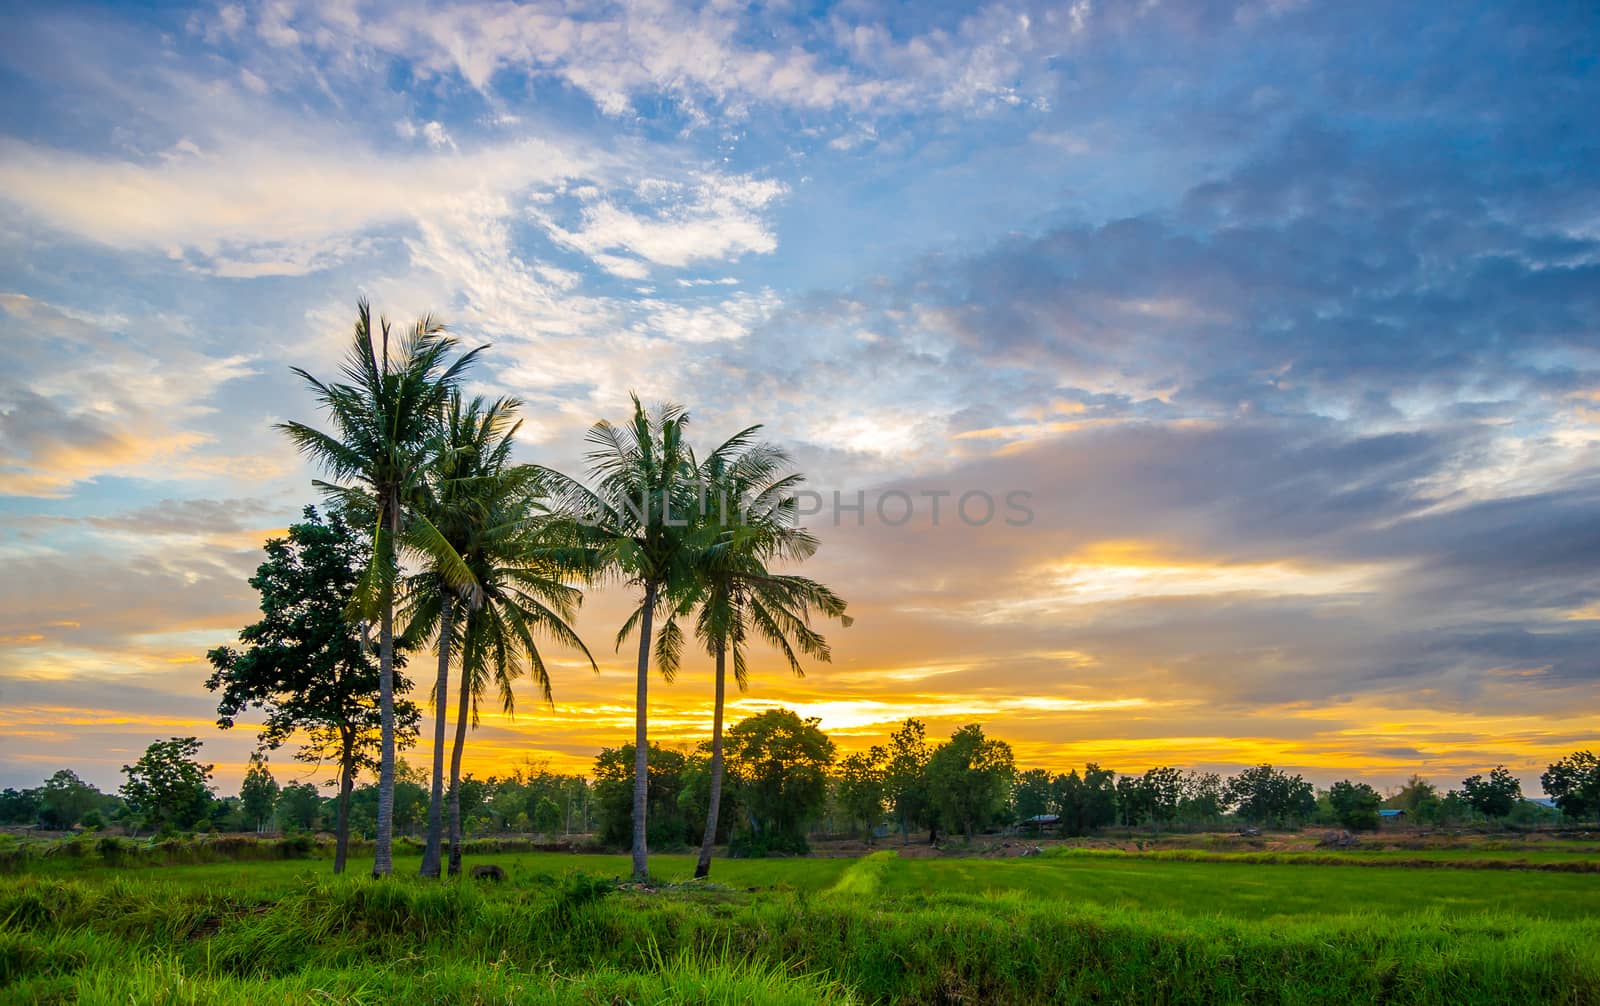 Lanscape sunset in the countryside of Thailand.